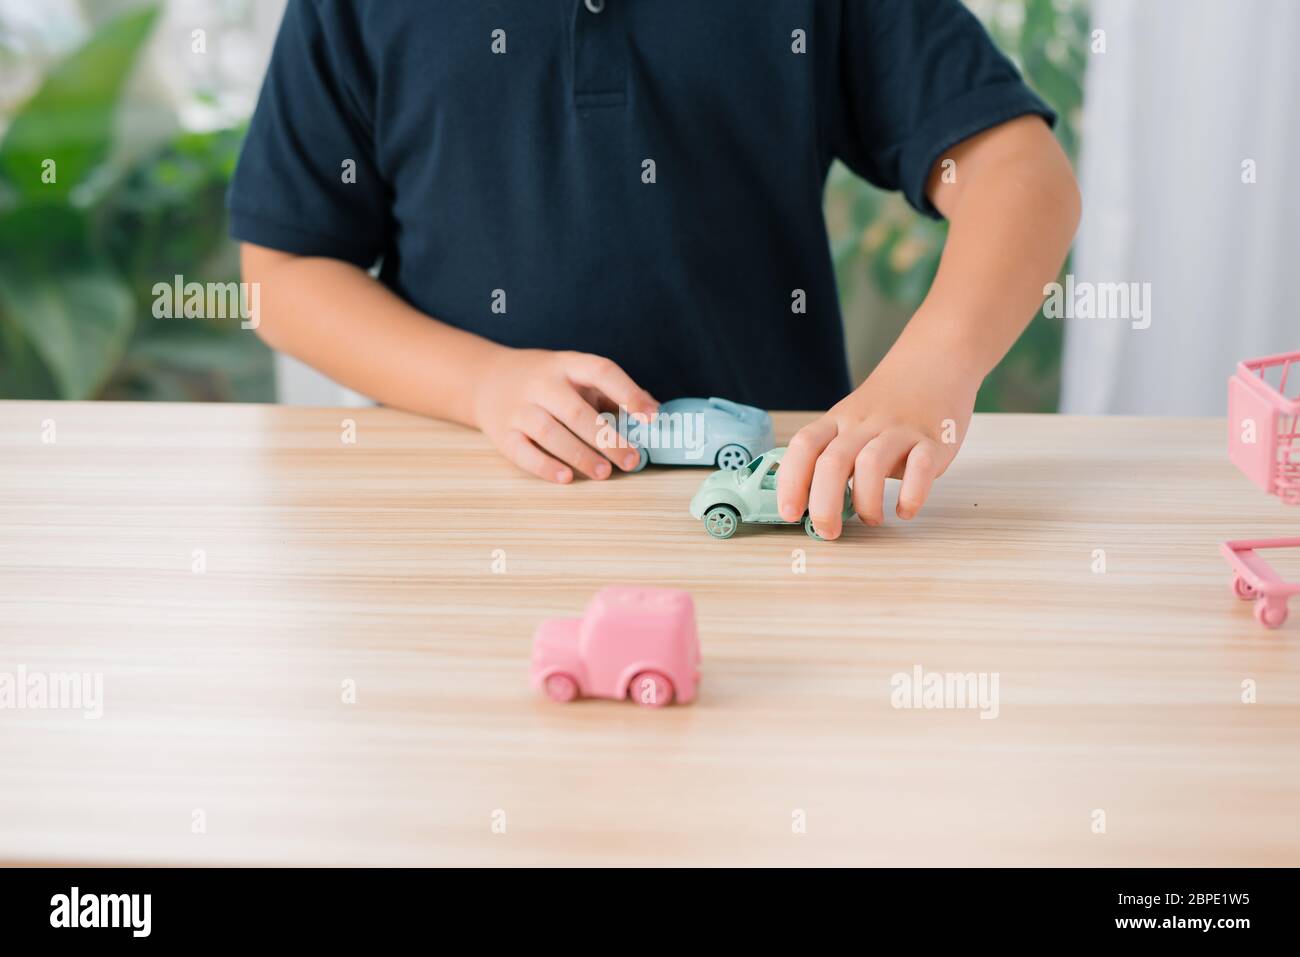 Little boy is playing with toy cars at home Stock Photo